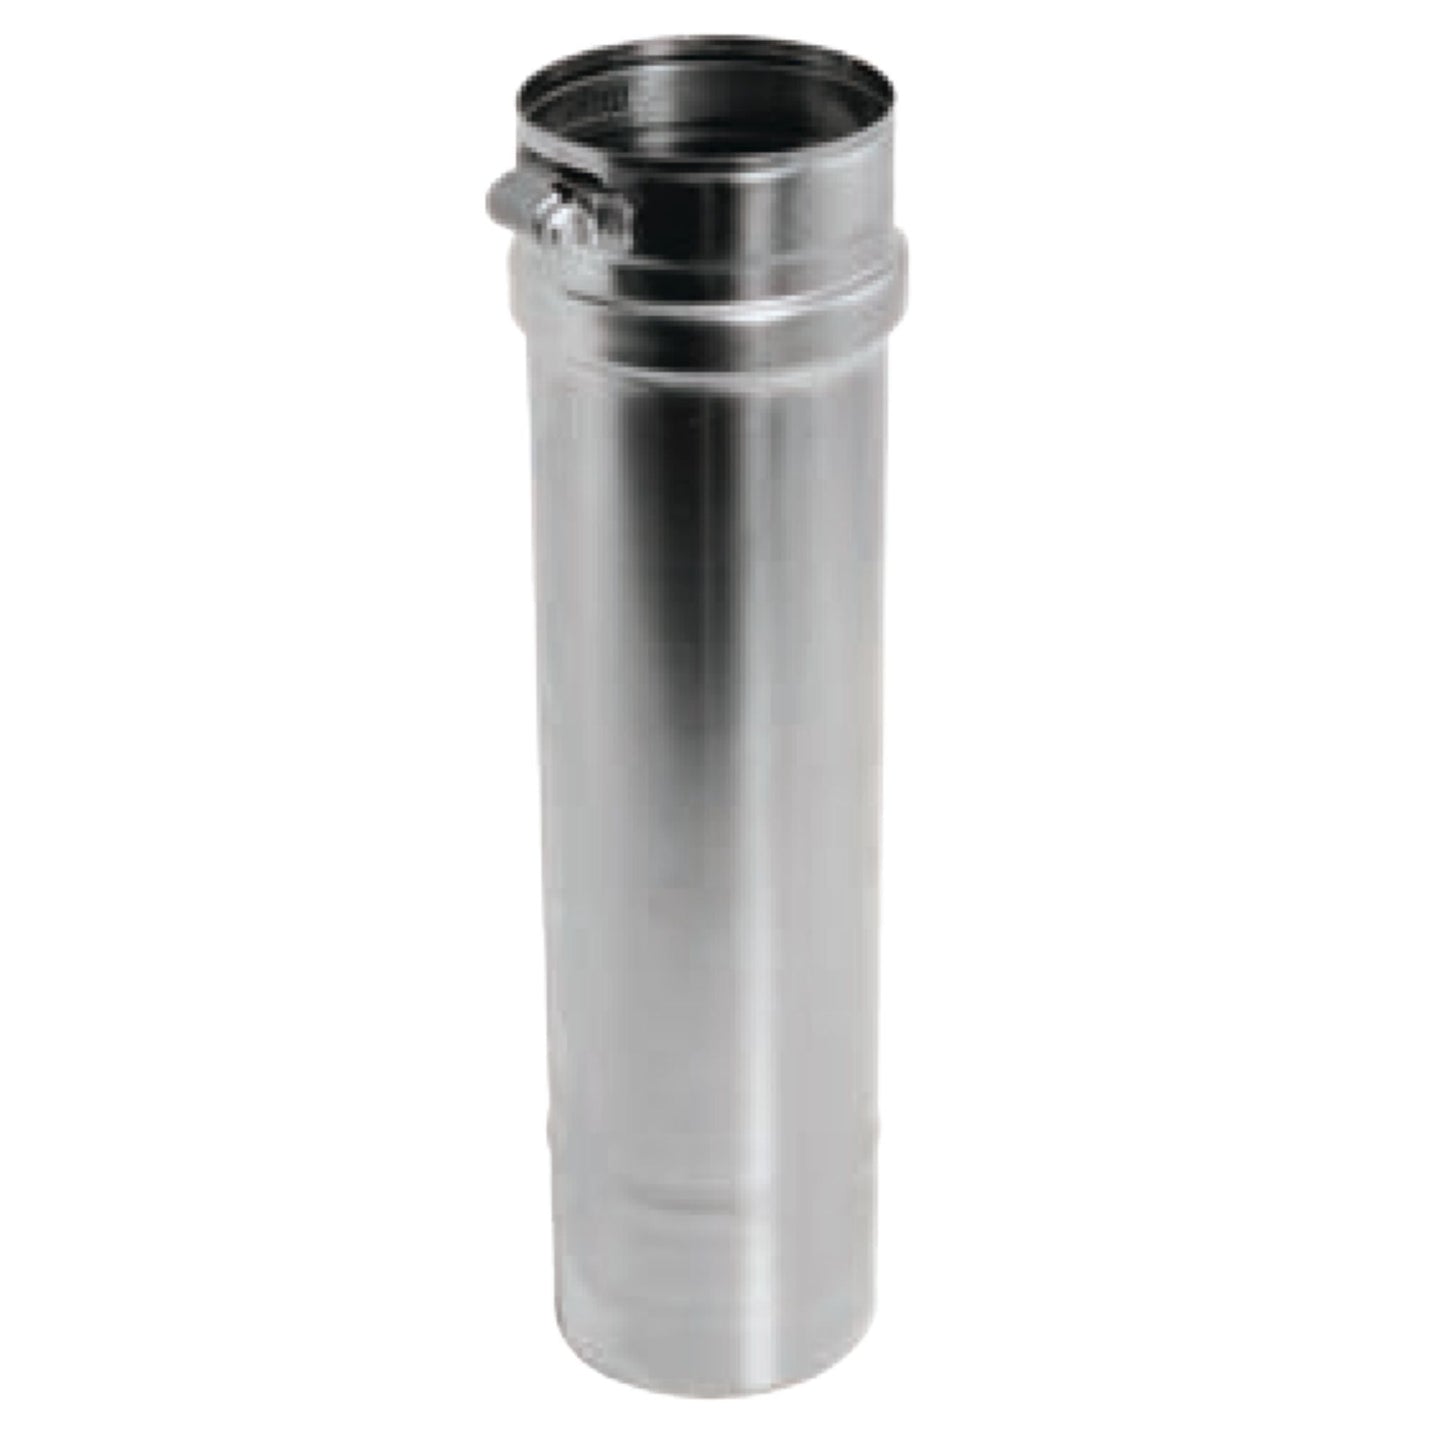 DuraVent FasNSeal 7" x 12" 29-4C Stainless Steel Vent Length